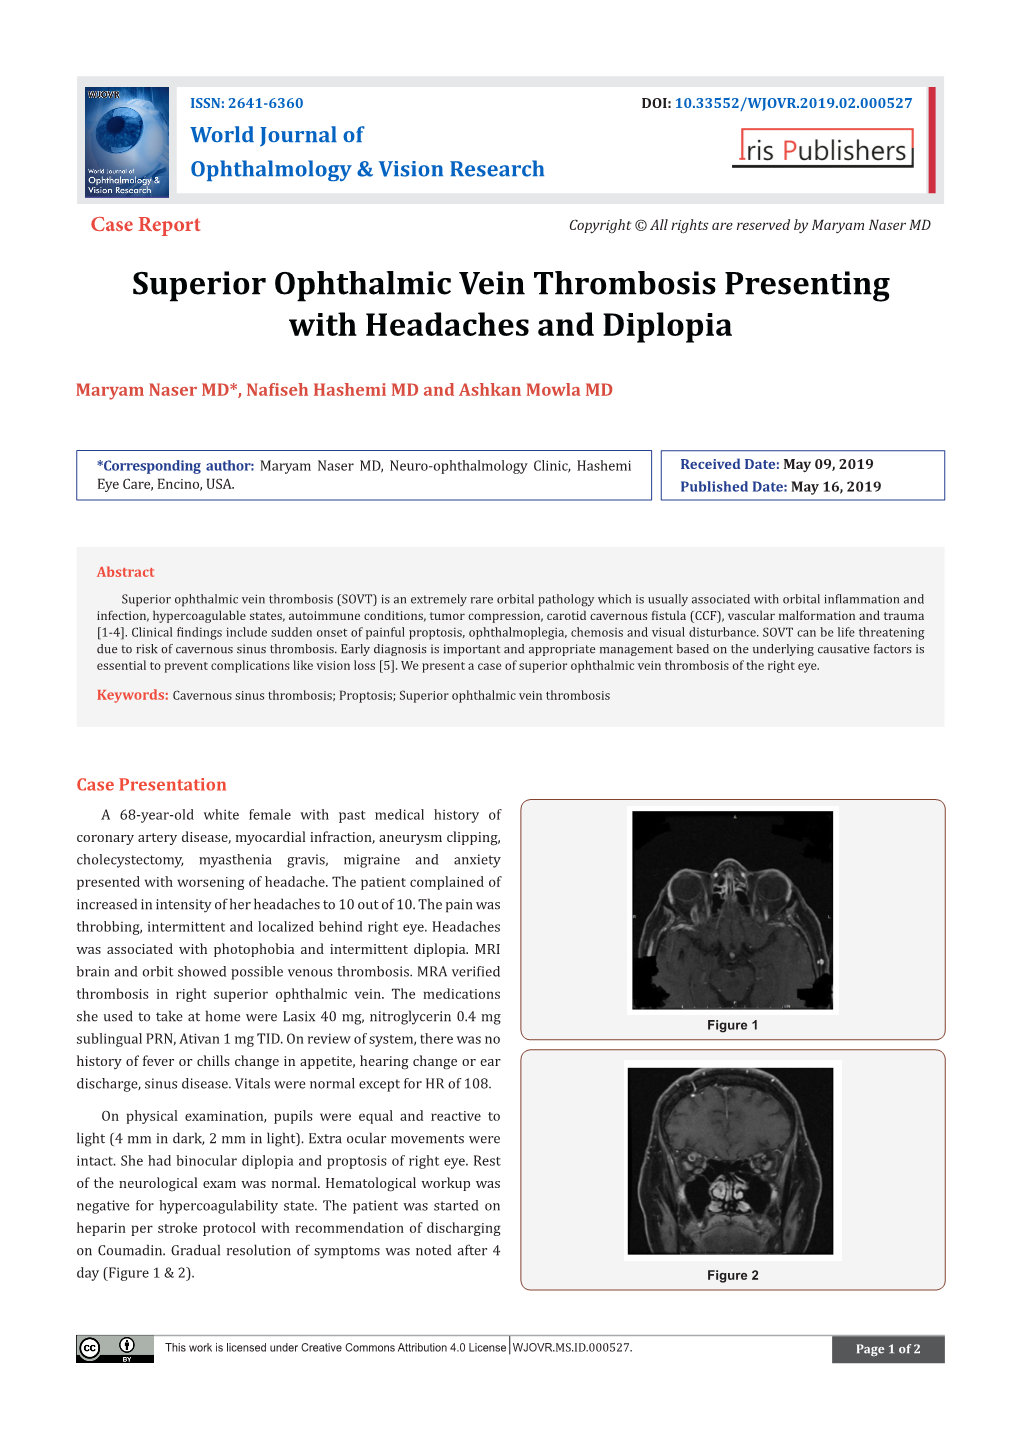 Superior Ophthalmic Vein Thrombosis Presenting with Headaches and Diplopia